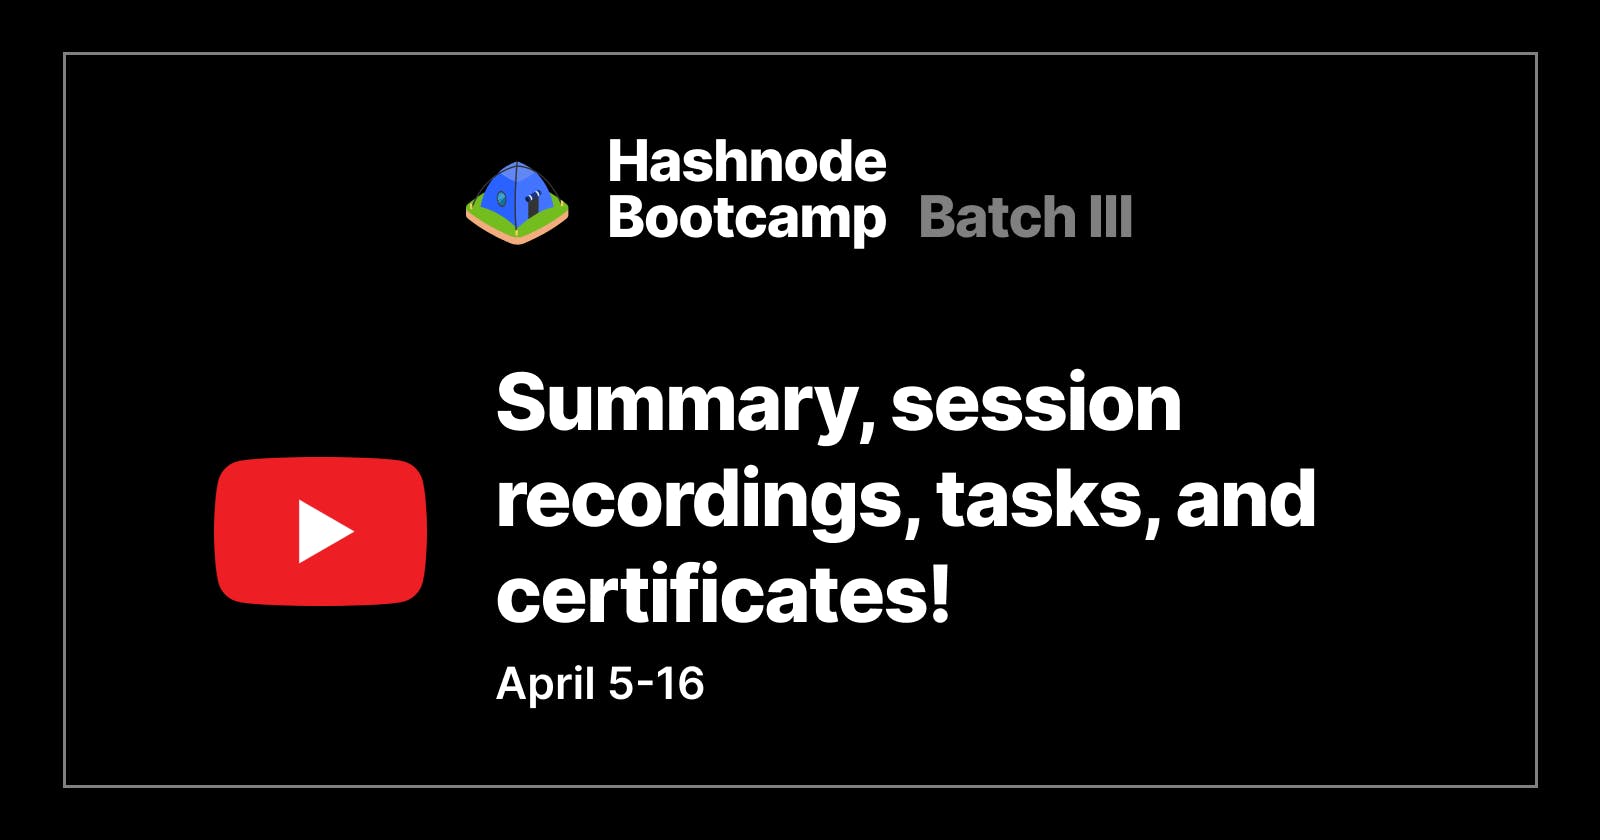 Hashnode Bootcamp III - Summary, session recordings, tasks, and certificates!